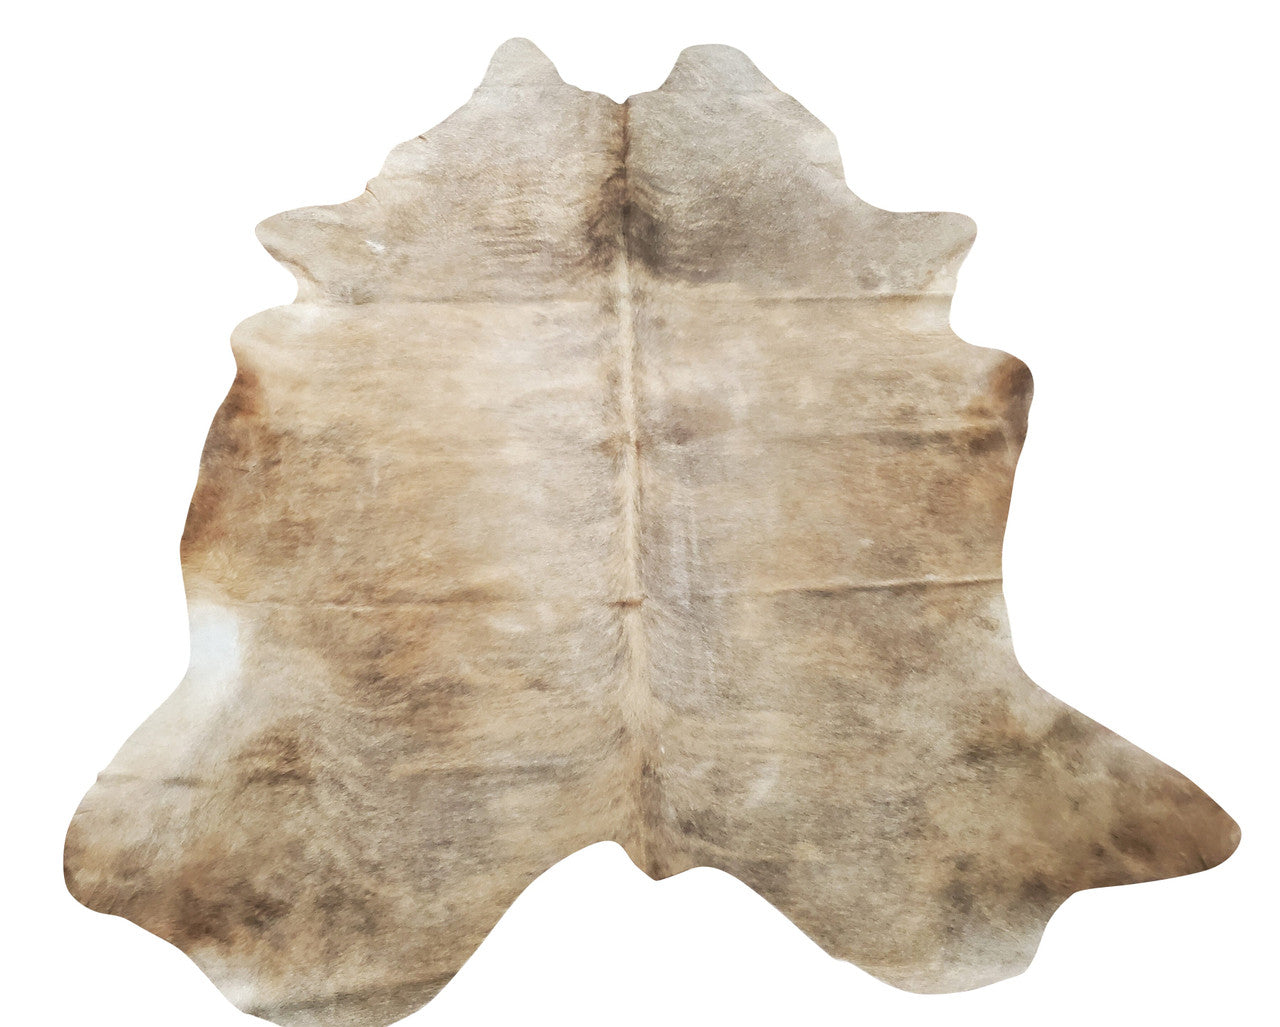 A beautiful cowhide rug in a kitchen might look tacky but it is trending and genuine is very easy to clean and maintain if you pick up the right cow skin. 